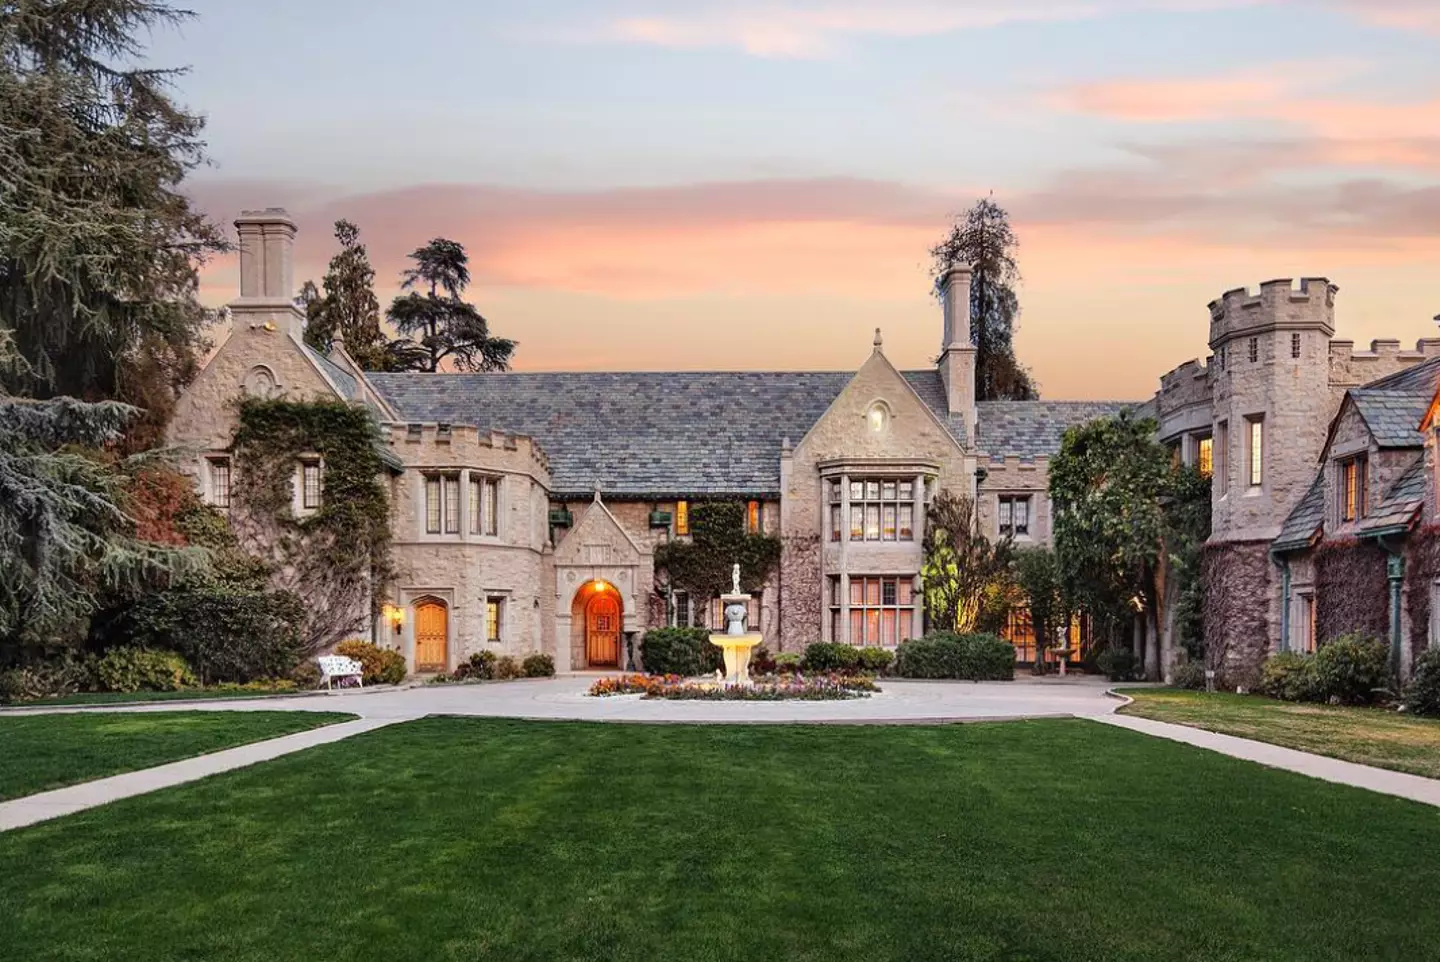 The Playboy Mansion in Los Angeles.